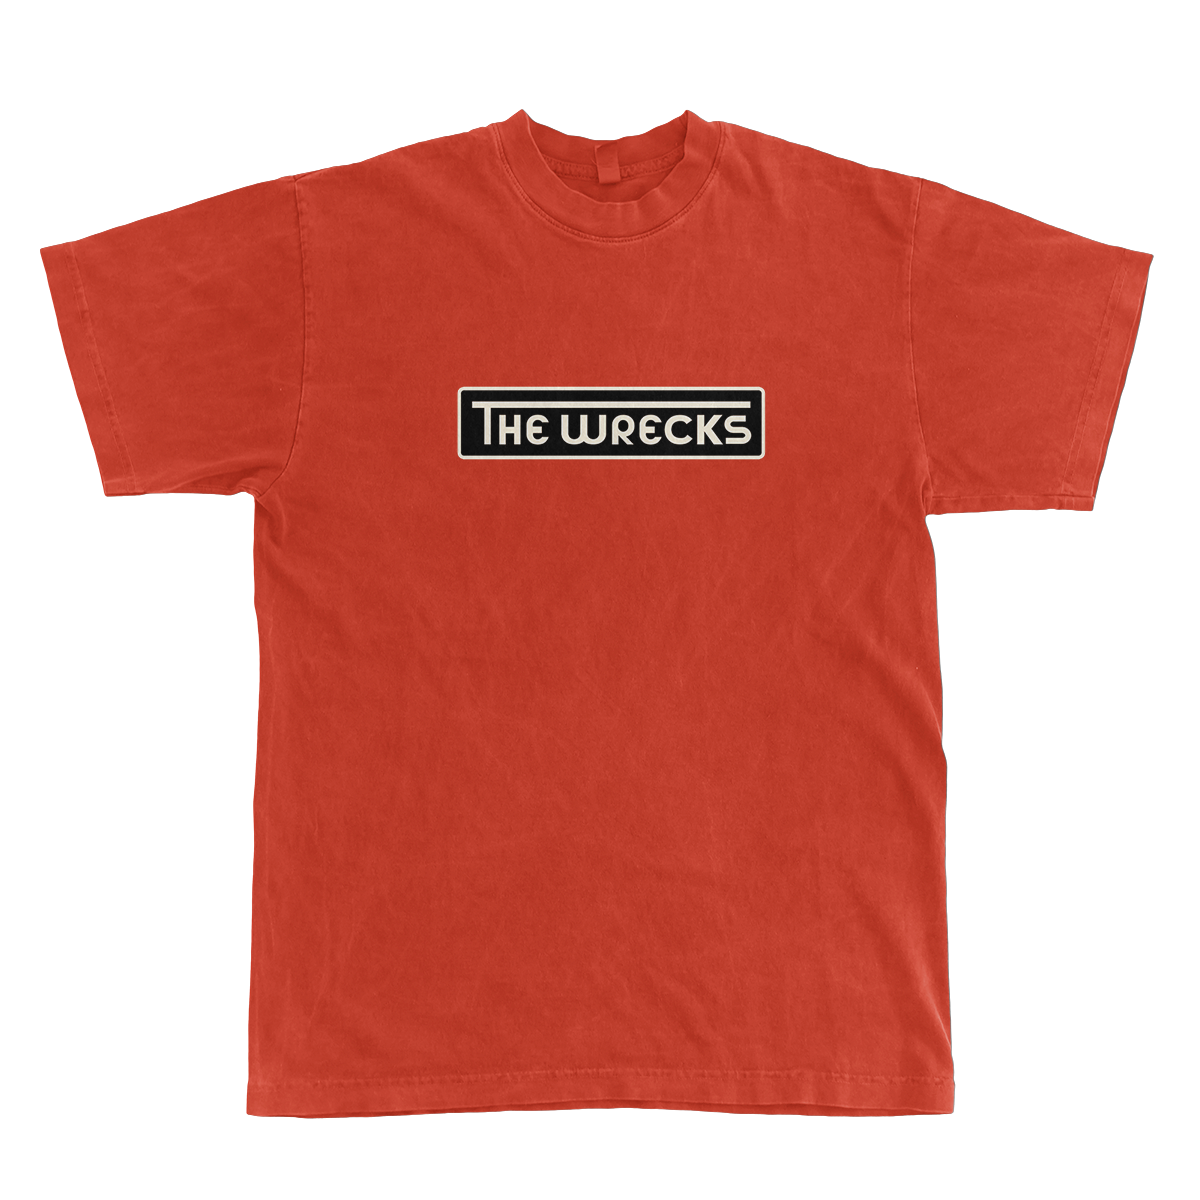 The Wrecks Emblem Screen printed on a Los Angeles Apparel pigment dyed 100% cotton tee